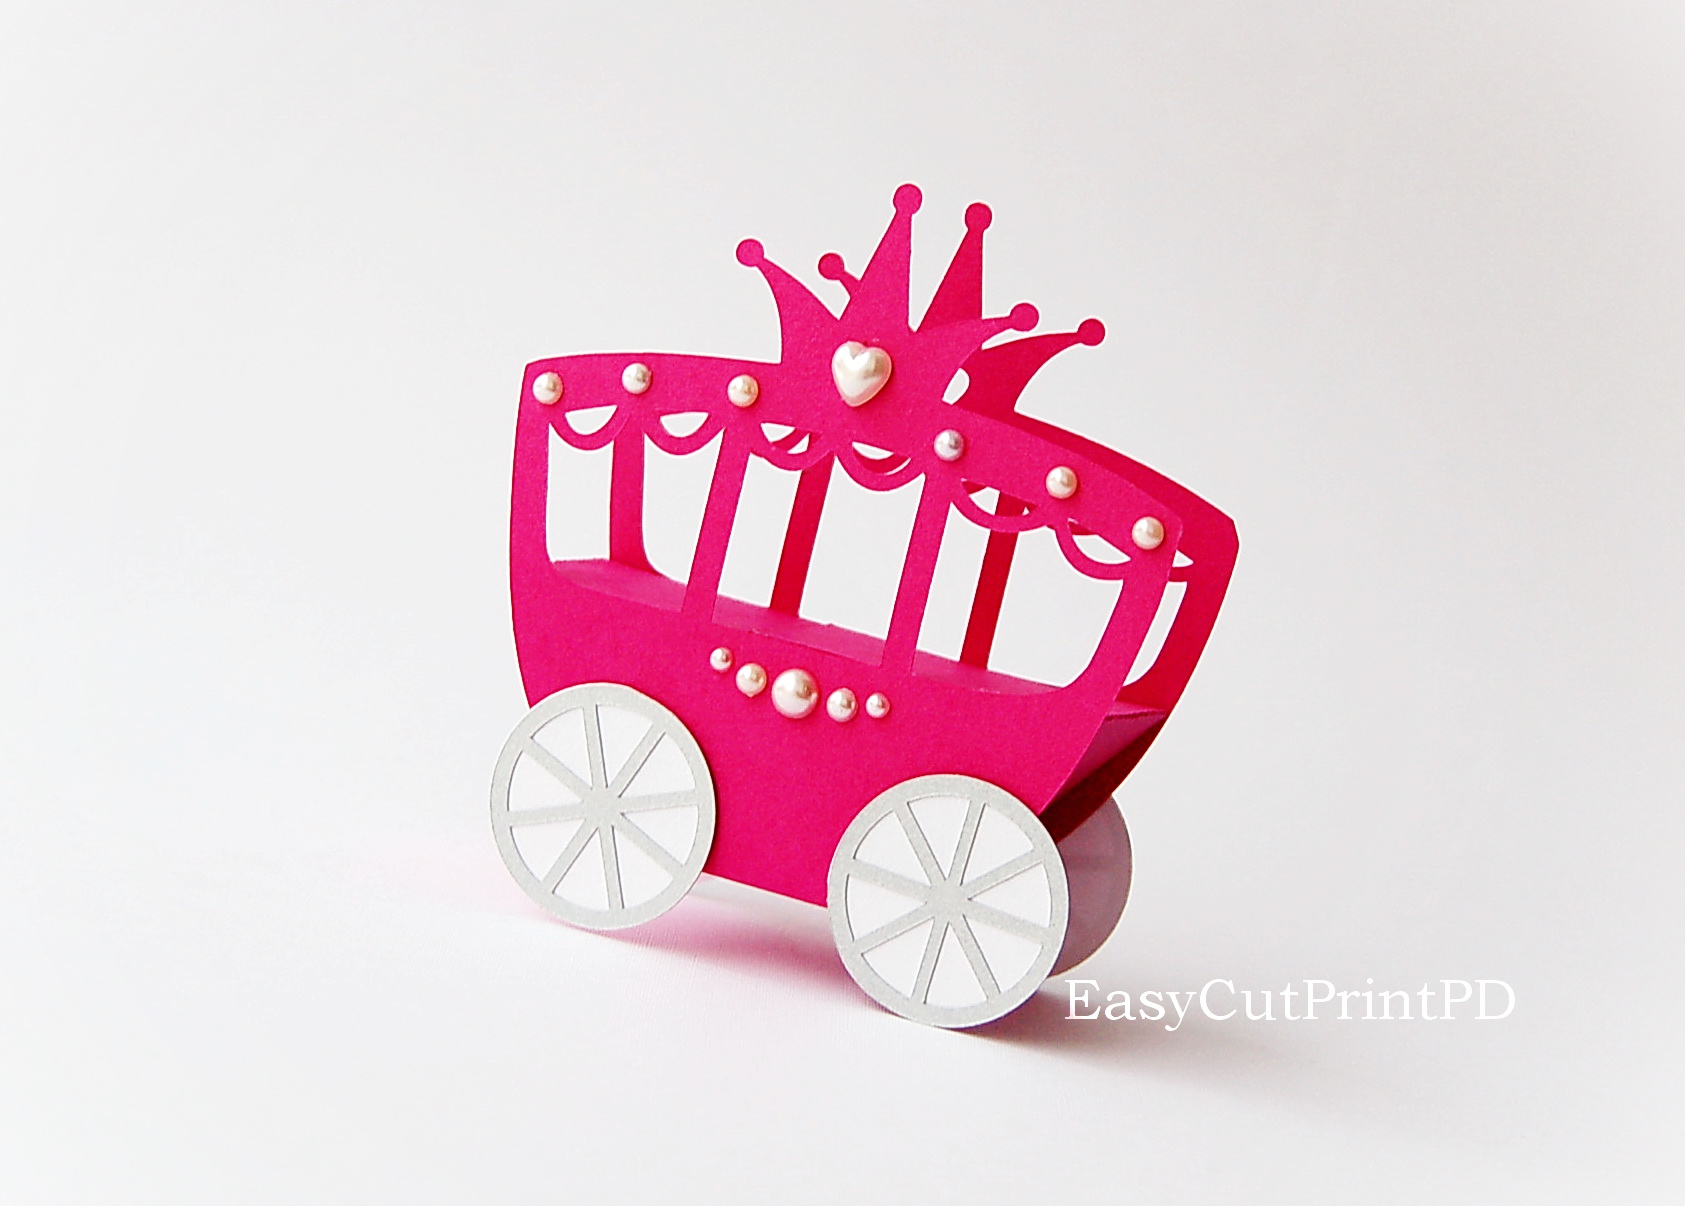 Download Princess Carriage box template ~ Invitation Templates on ...